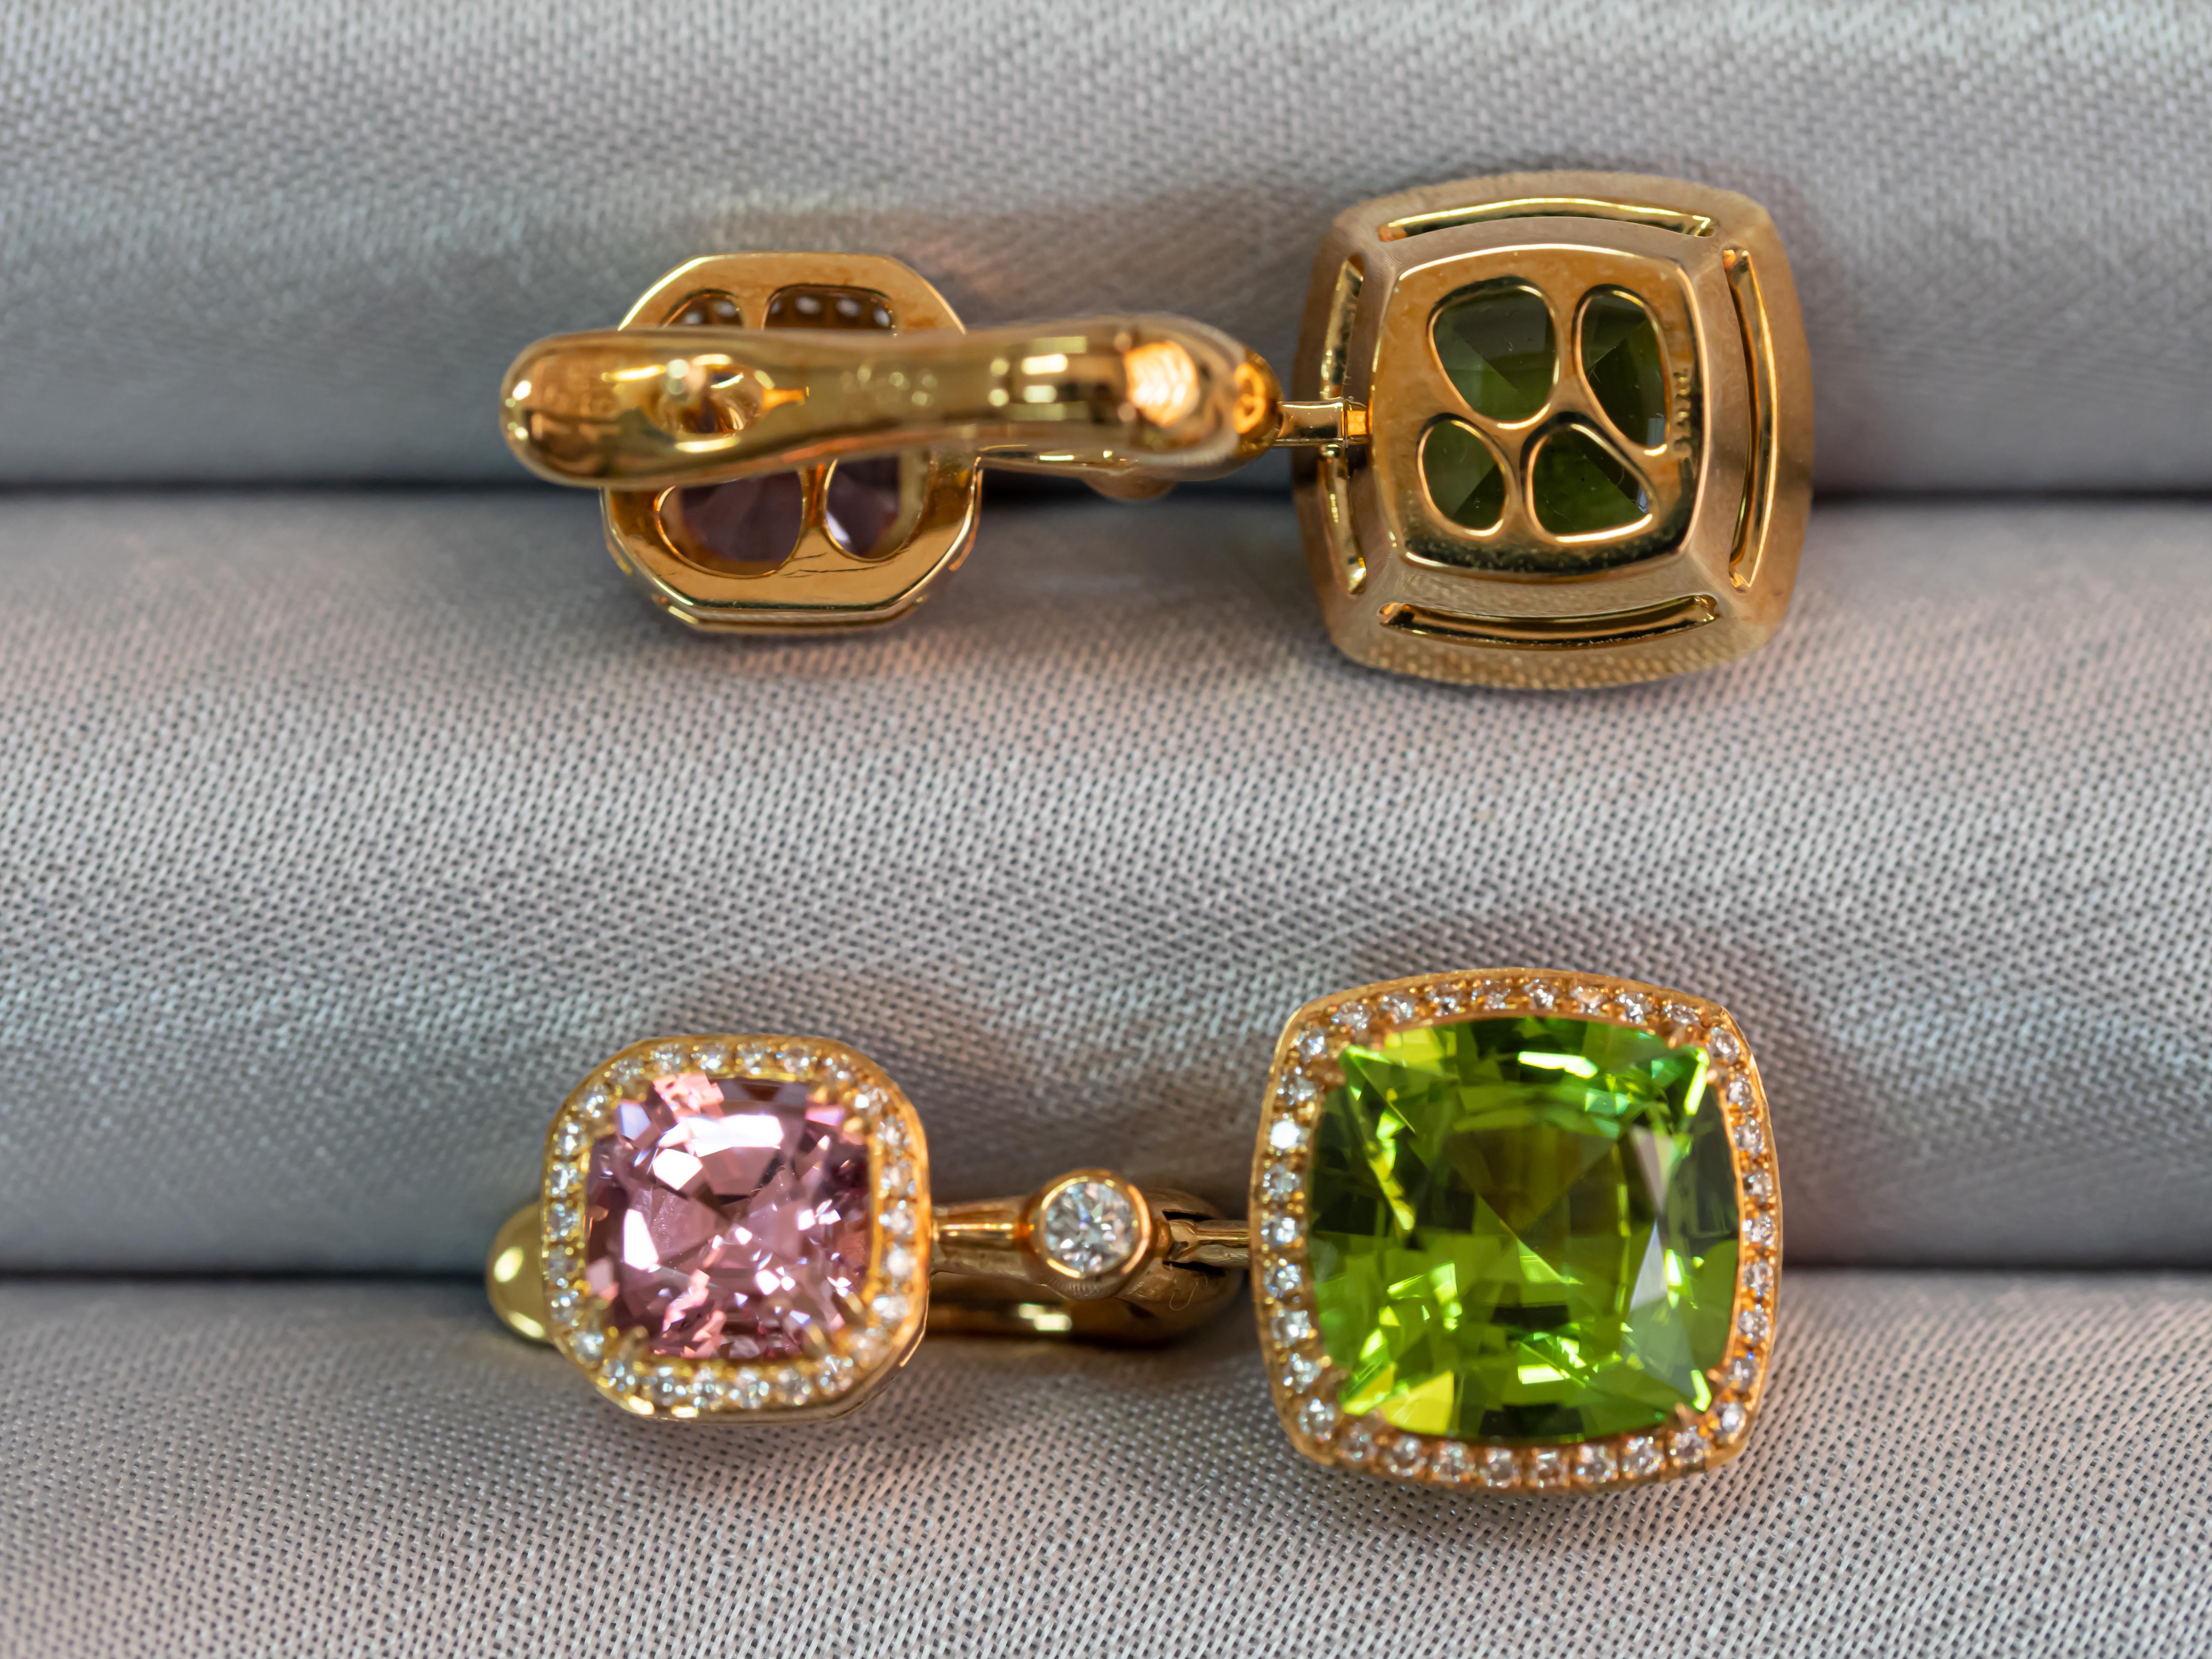 •	18K Yellow Gold. 
•	Green Peridots in square cushion cut –2 pc,  total carat weight – 8.25.
•	Pink Spinels in square cushion cut – 2 pc,  total carat weight – 2.13.
•	Diamonds in round cut – 100 pc, total carat weight – 0.37.
•	Product Weight -